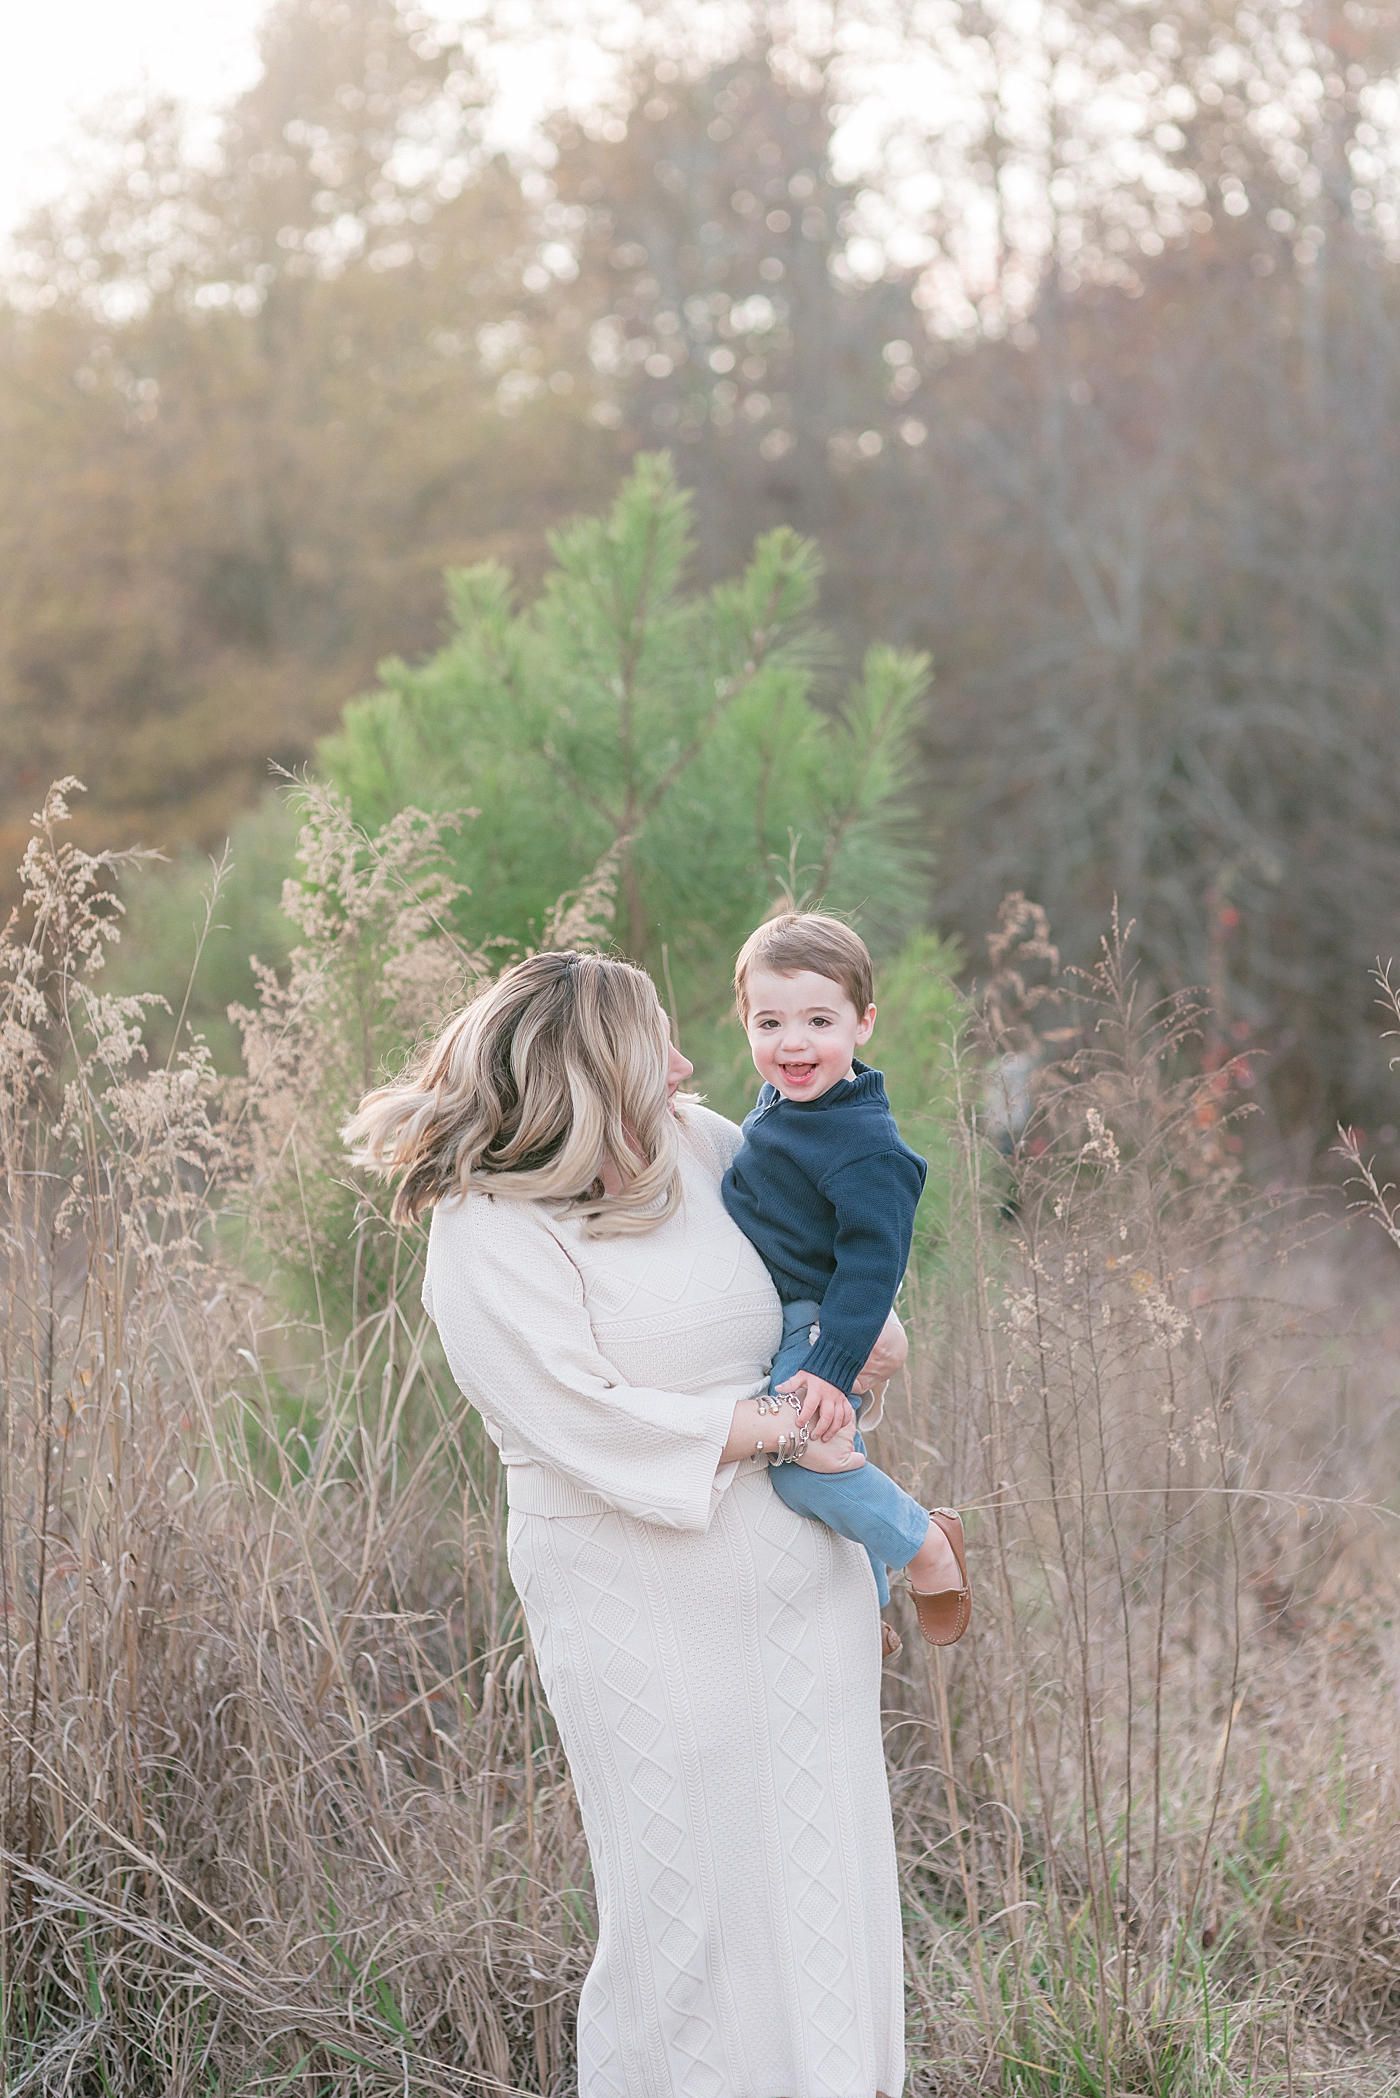 Mom playing with toddler boy in navy in a field | Photo by Anna Wisjo Photography 